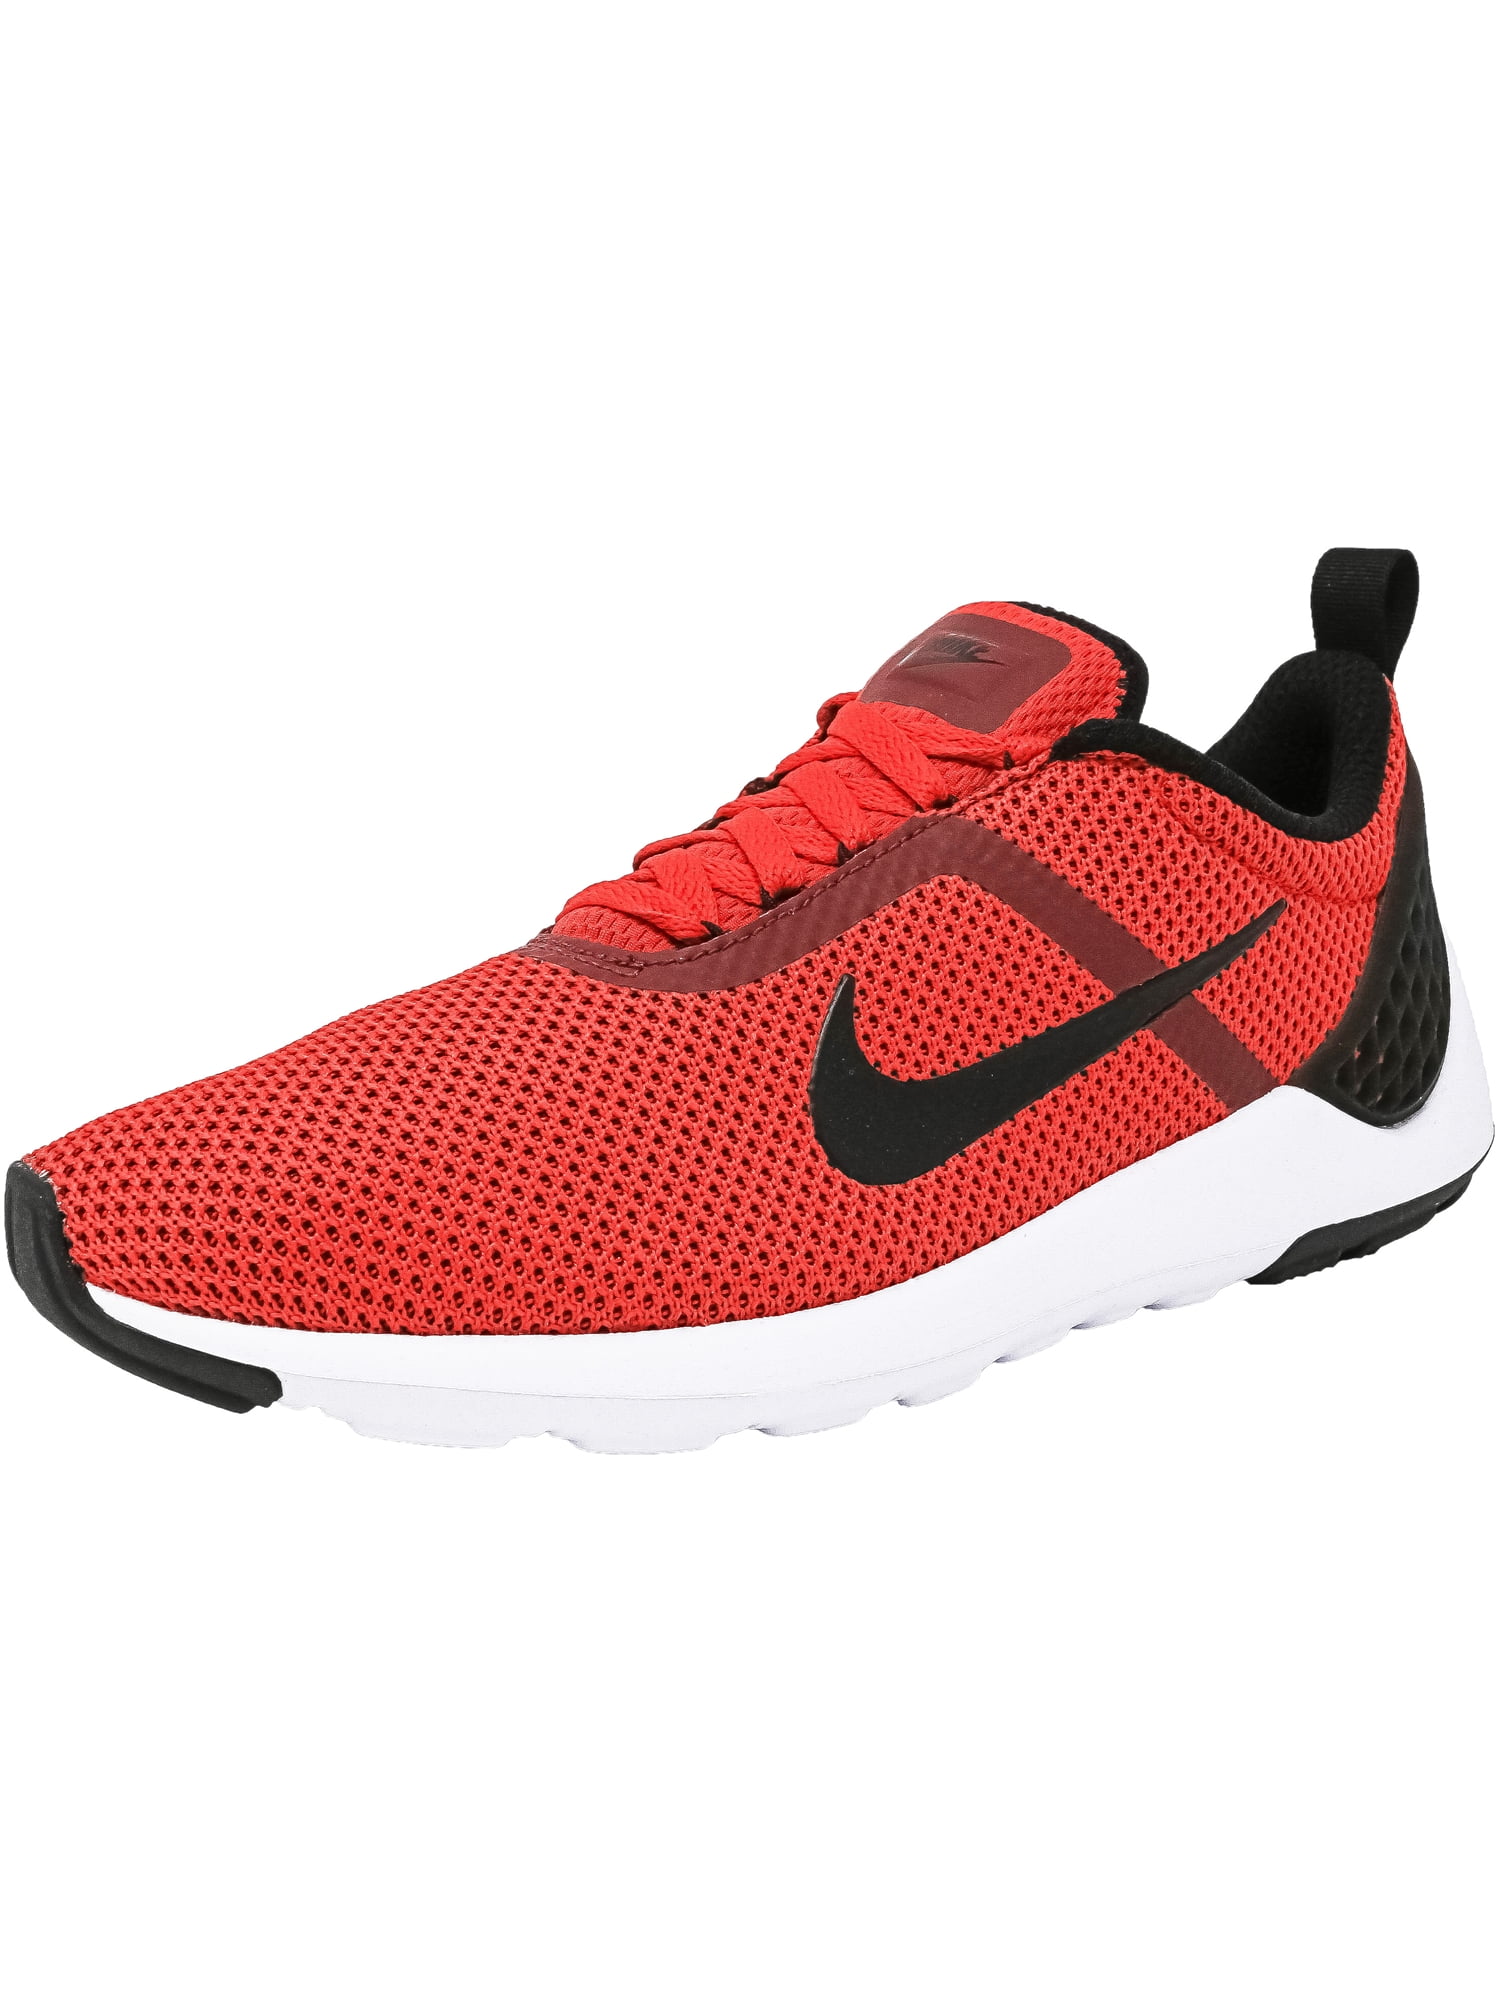 nike red black running shoes